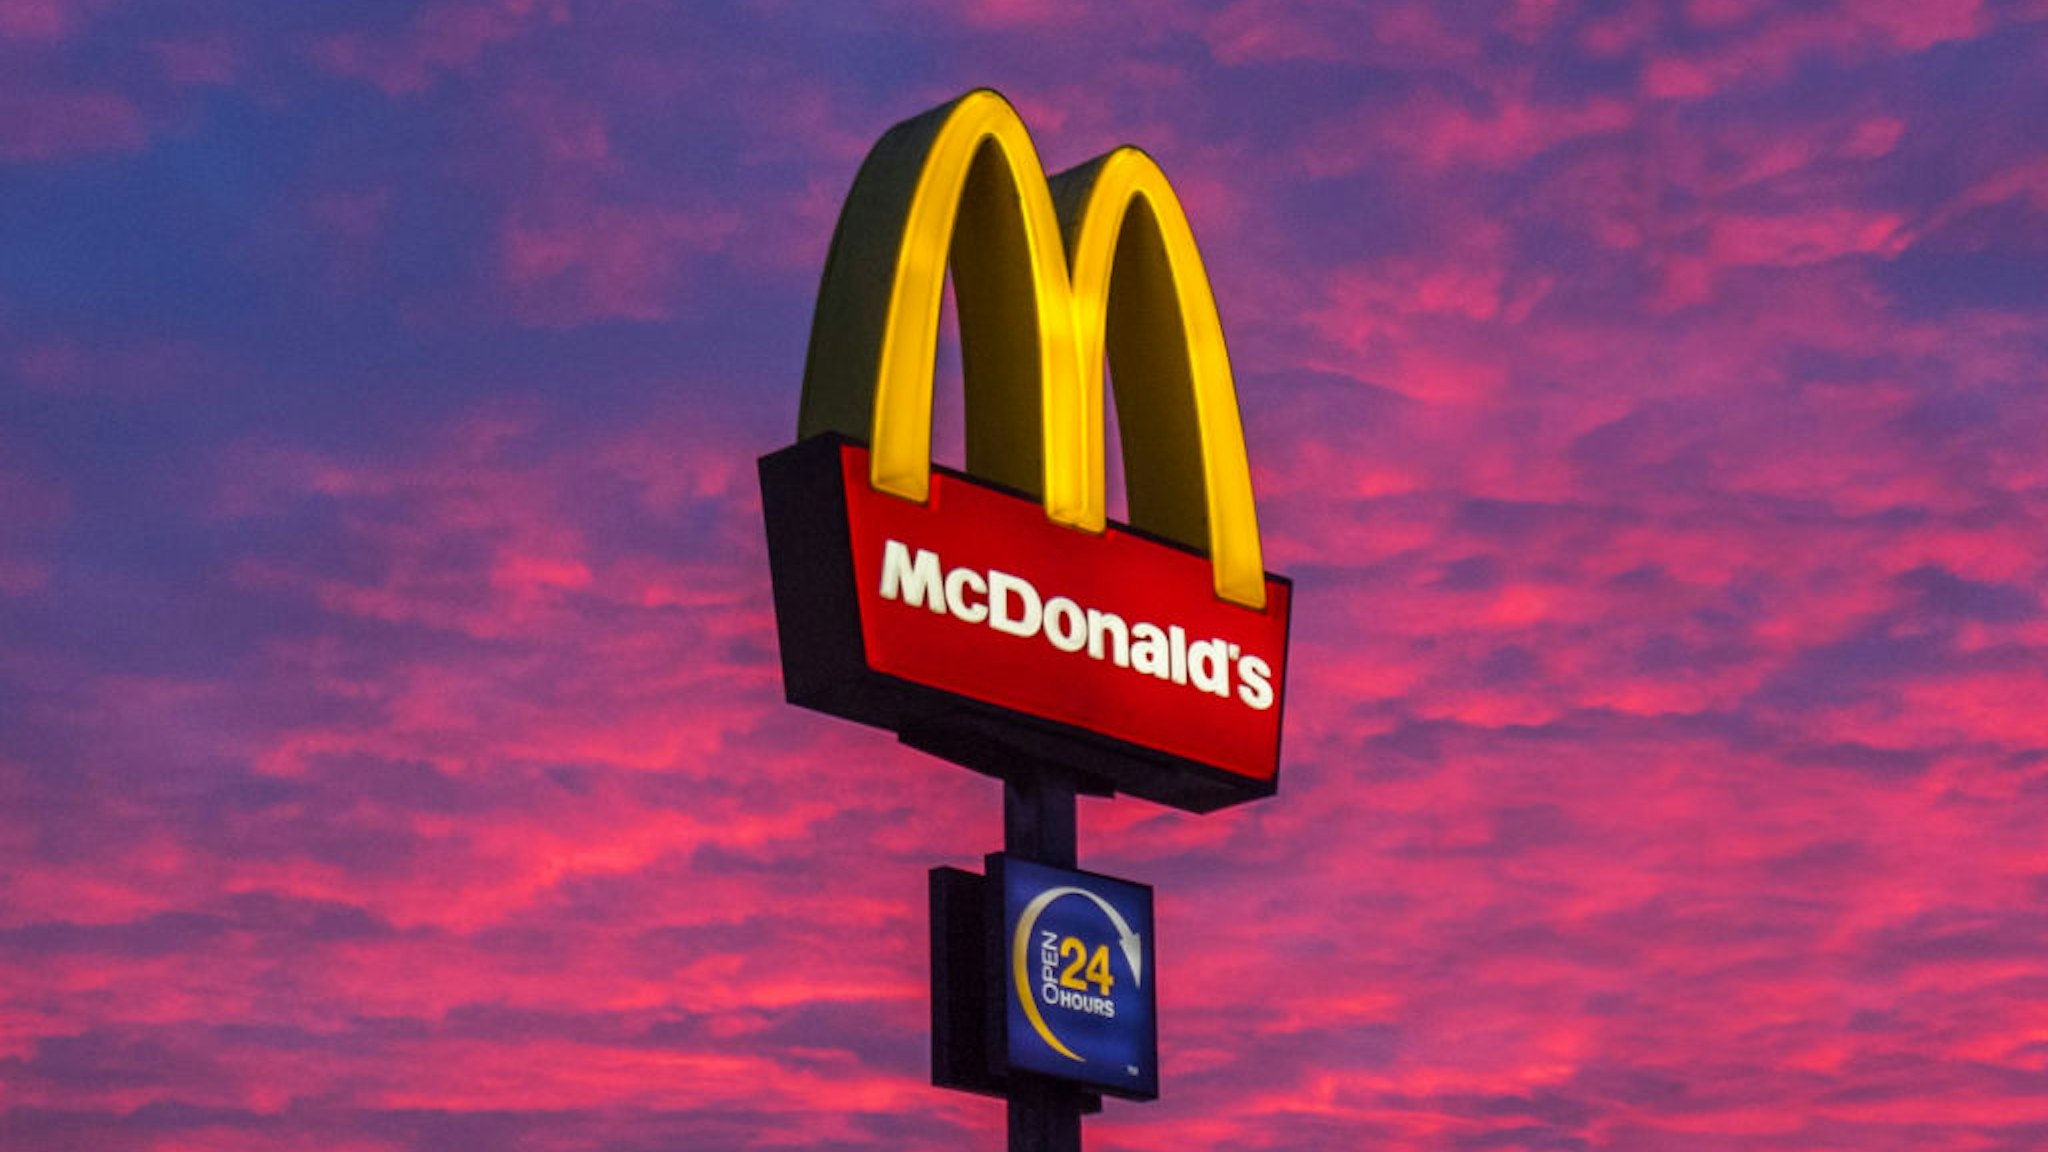 The sky turns red as the sun sets behind a McDonalds restaurant in Southport on January 19, 2020 in SOUTHPORT, Lancashire, UK.